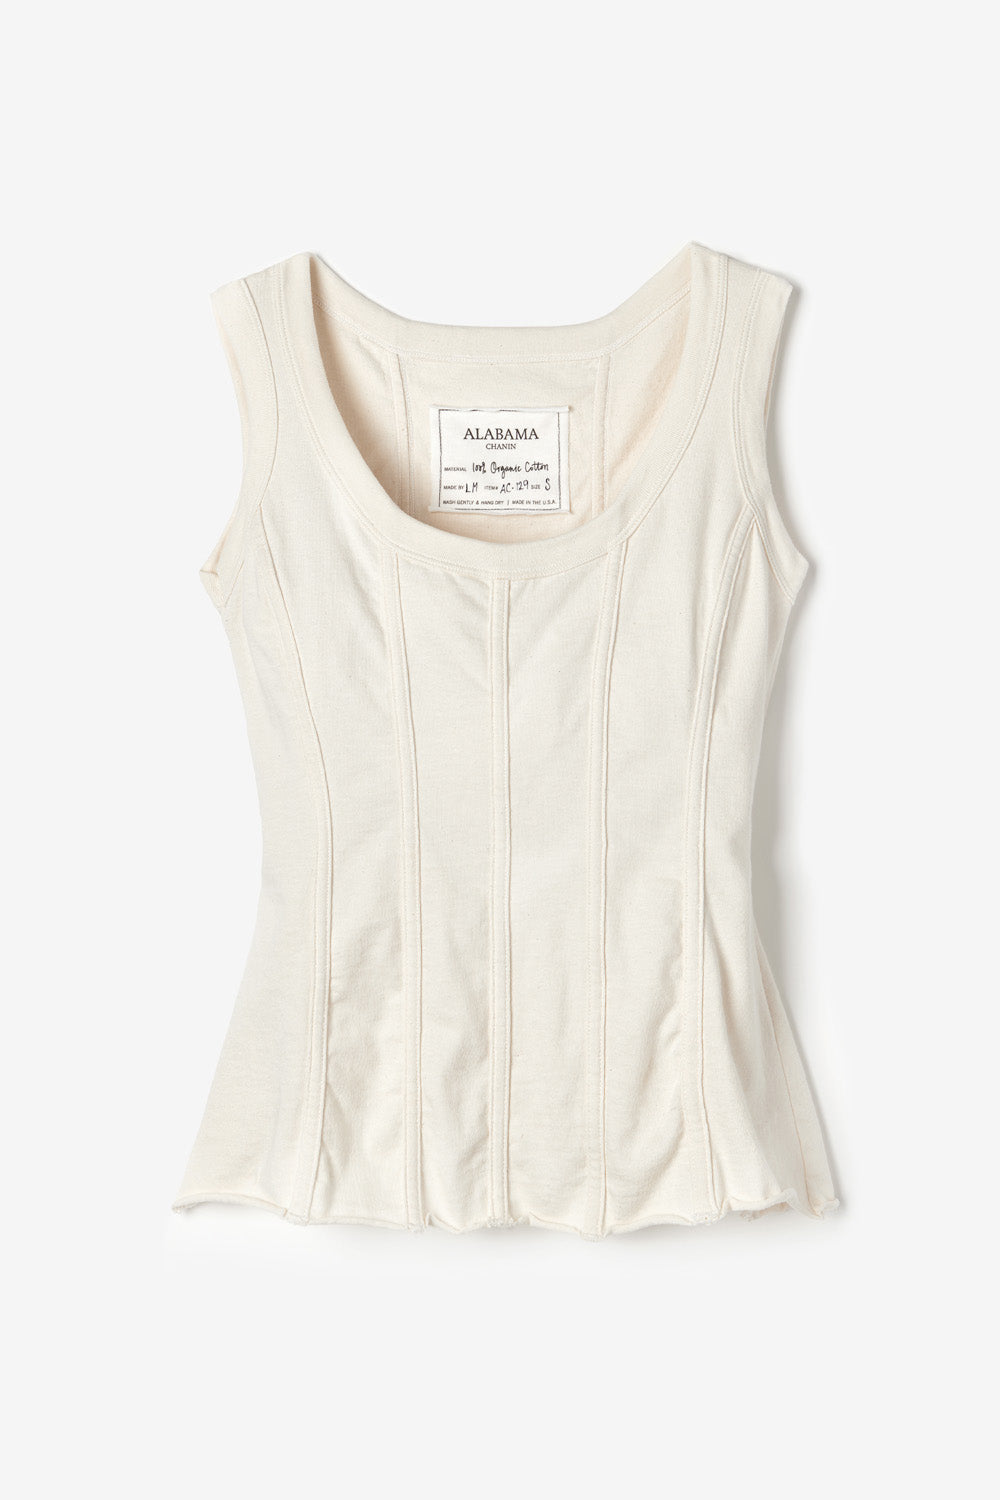 Alabama Chanin The Corset Machine Sewn Fitted Corset Top for Women in Natural